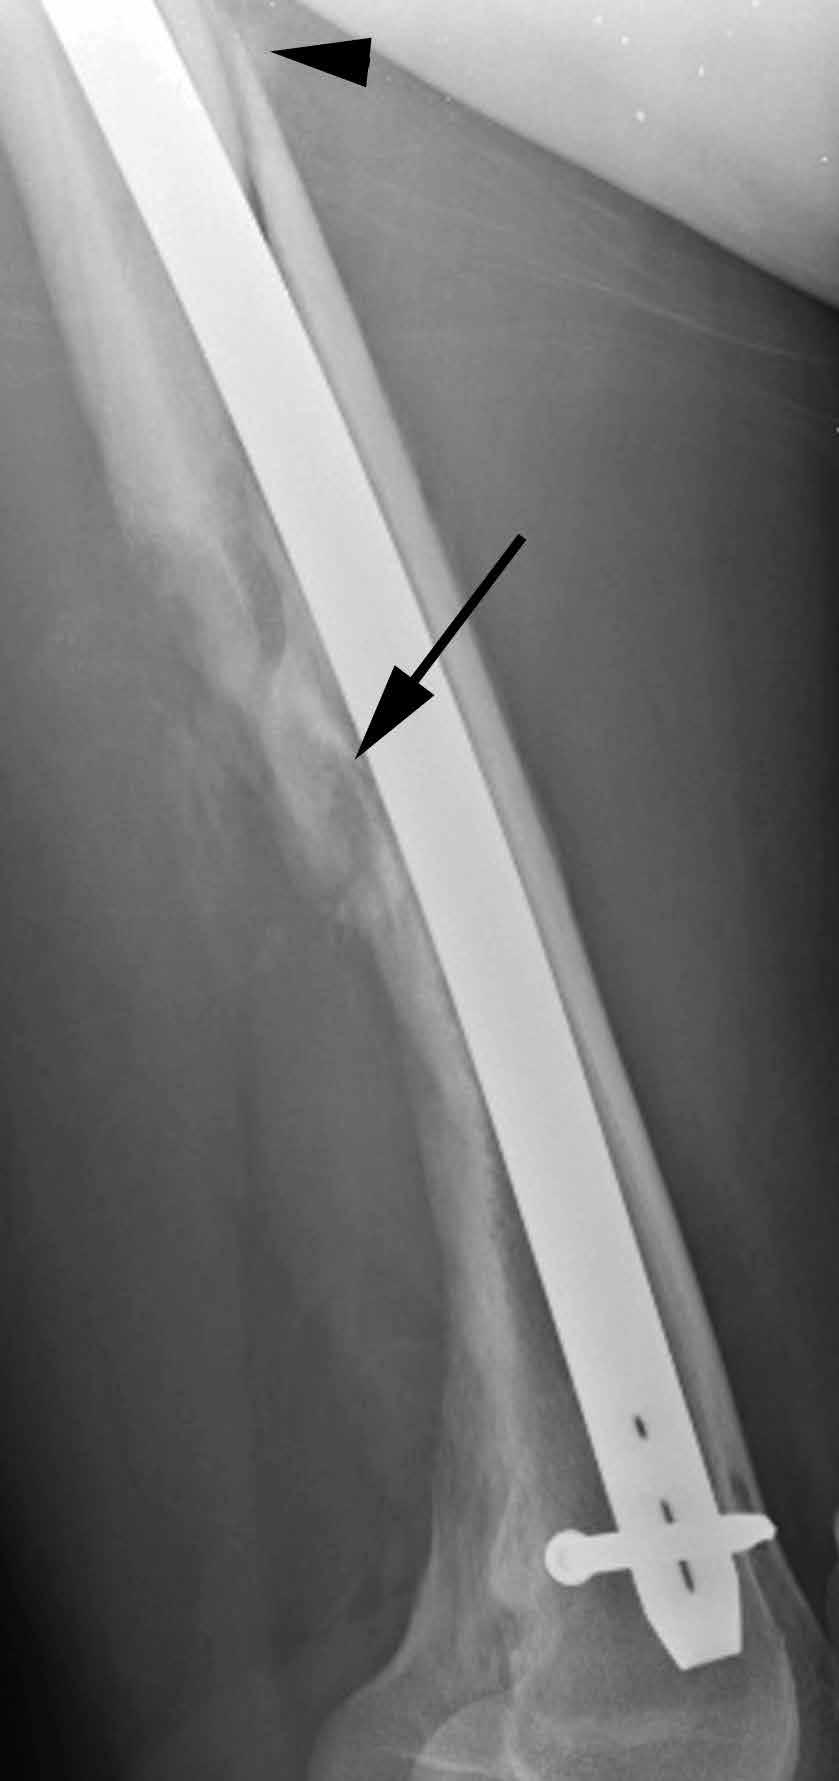 () nteroposterior and () lateral radiographs 2 years after presentation show complex bony destructive changes (black arrowheads) with irregular sunburst pattern of periosteal reaction (white arrows)